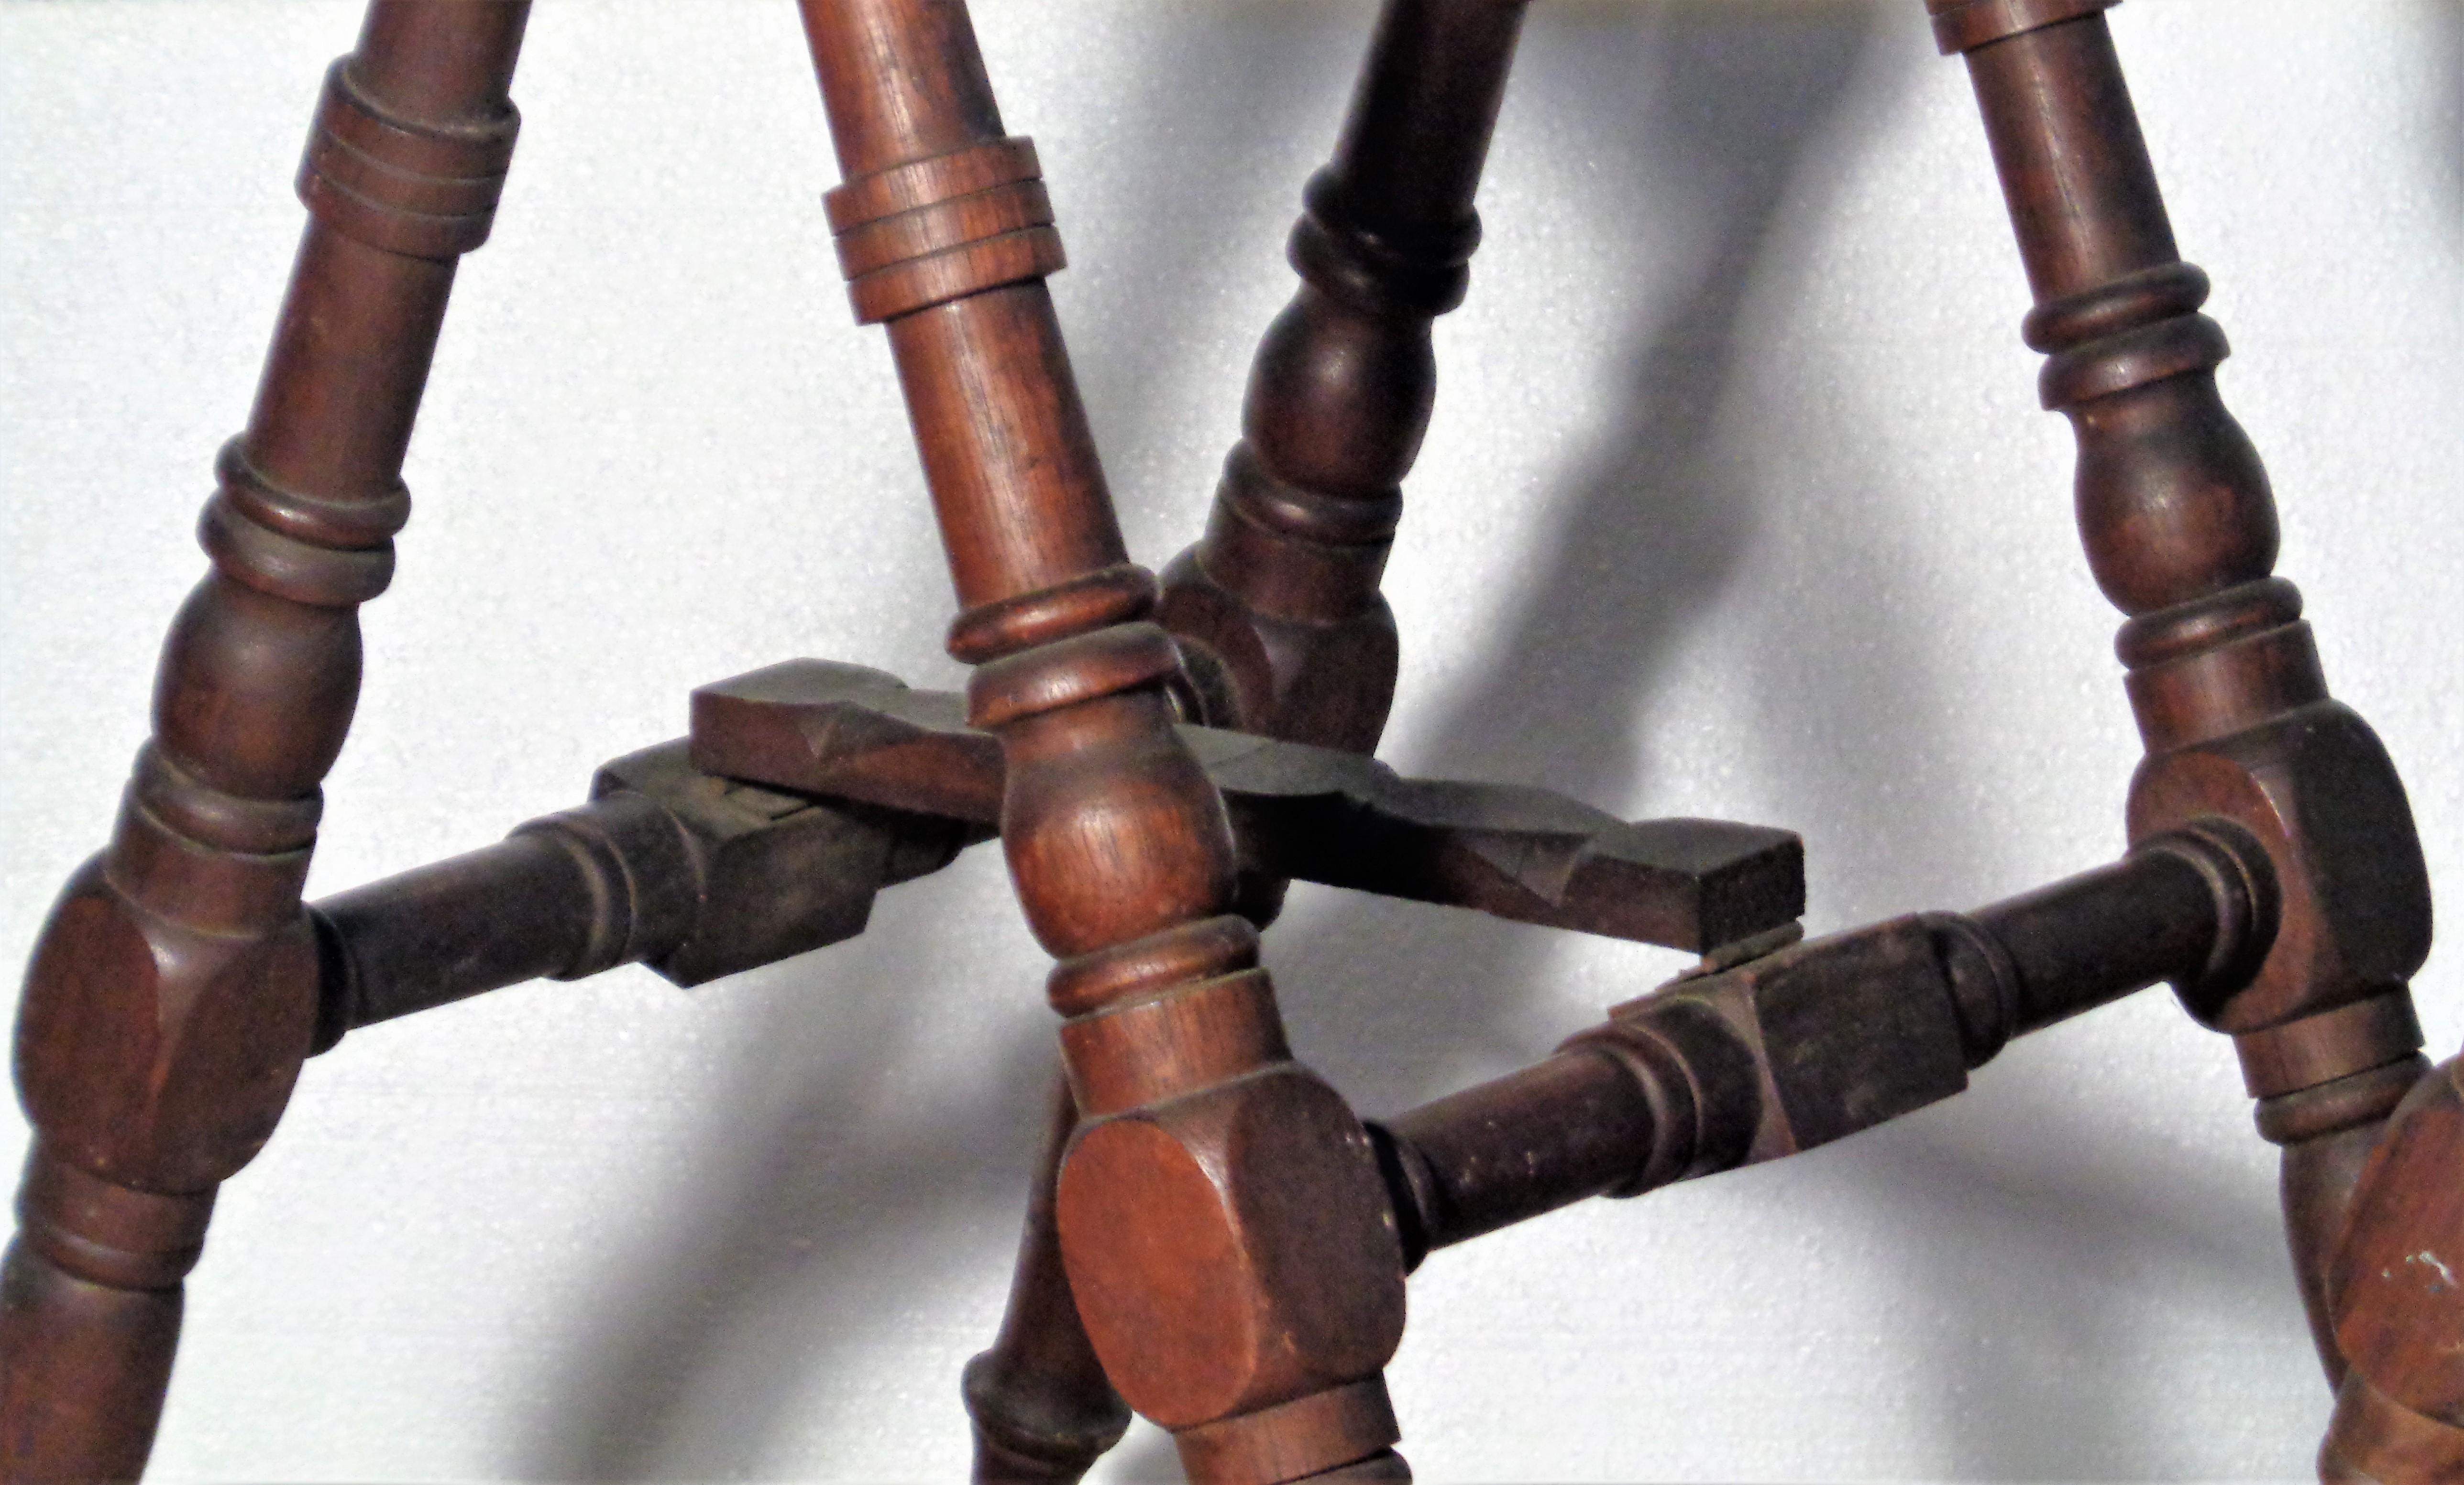 Pair of 19th century finely carved walnut folding sawhorse stands with brass hinges and brass feet in overall beautifully aged original old surface color. Measurements when open - 17